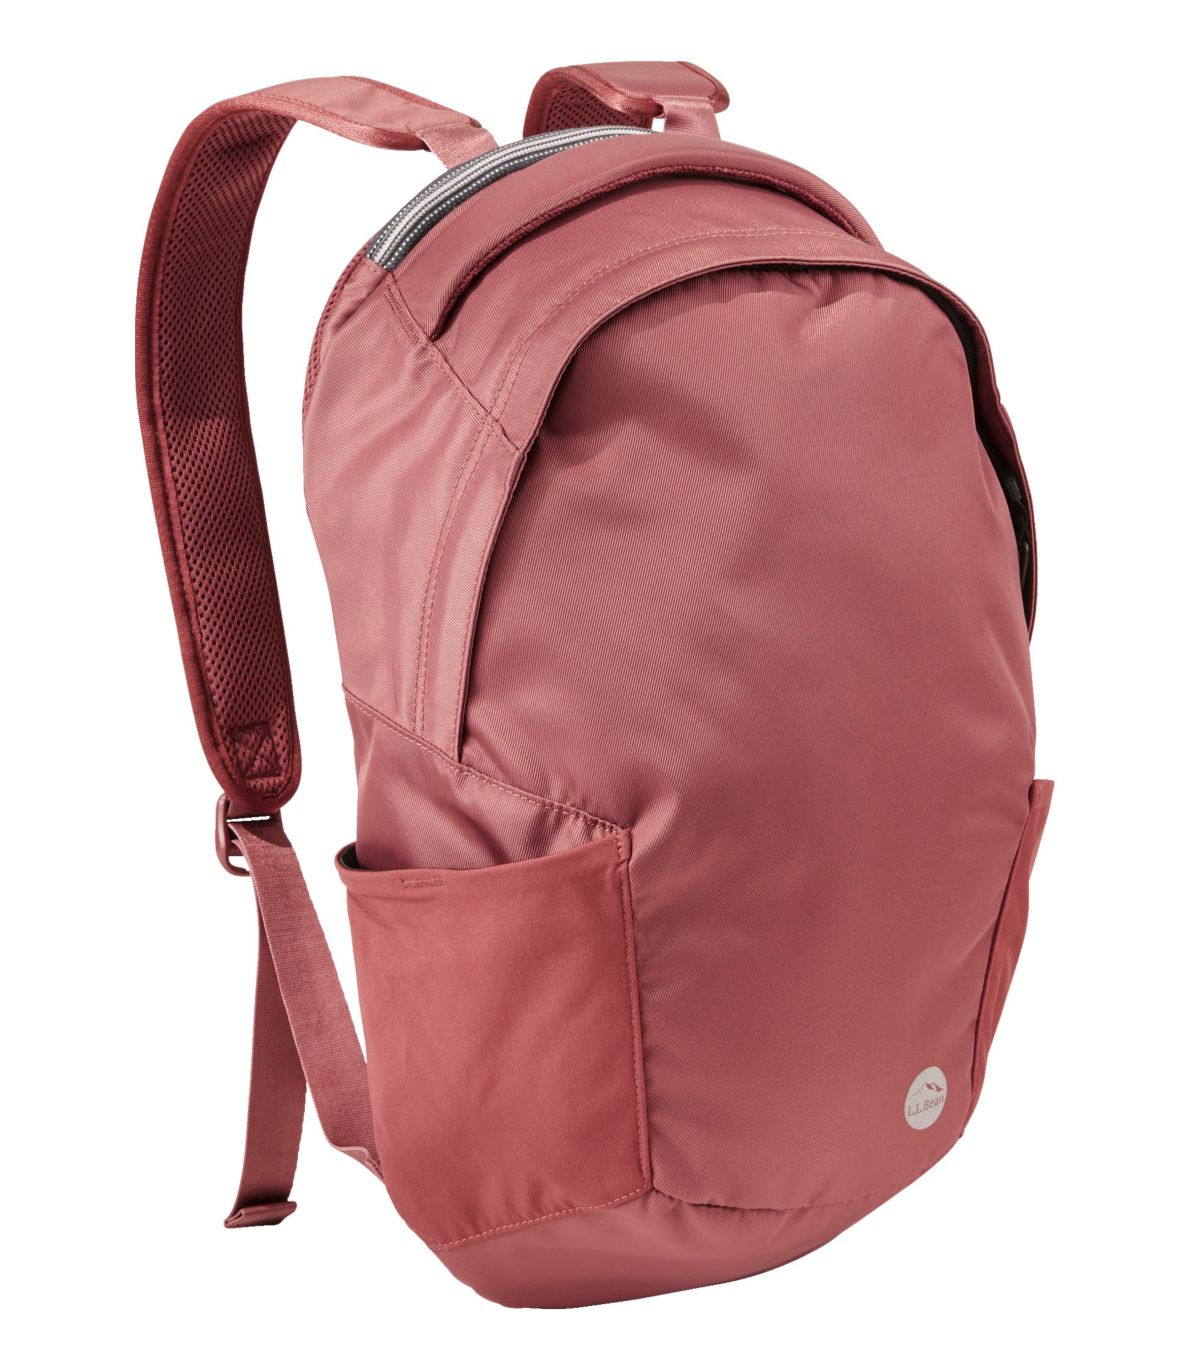 Boundless Backpack